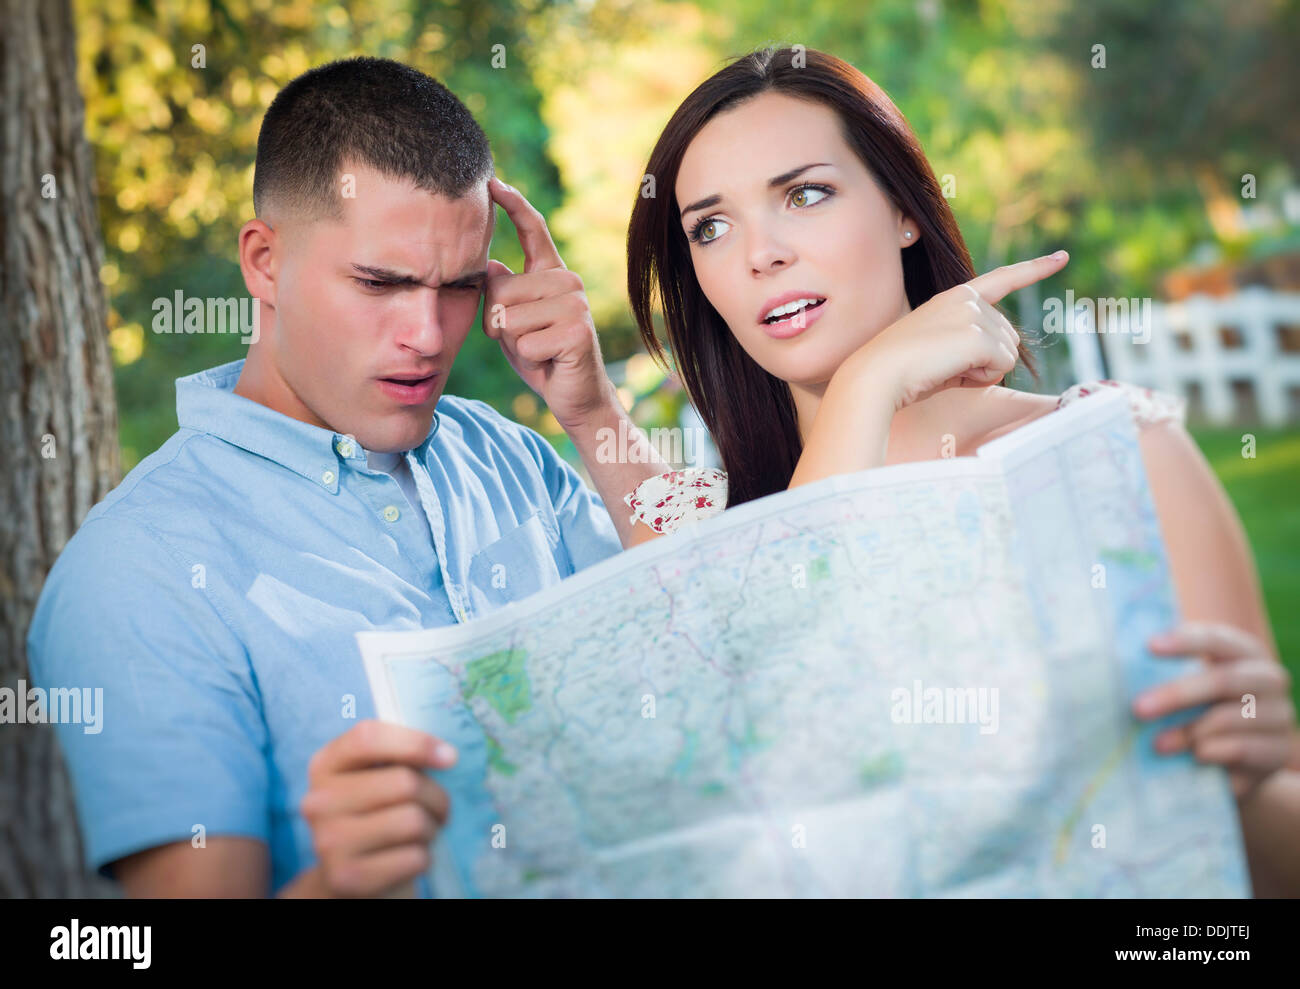 Lost and Confused Mixed Race Couple Looking Over A Map Outside Together. Stock Photo